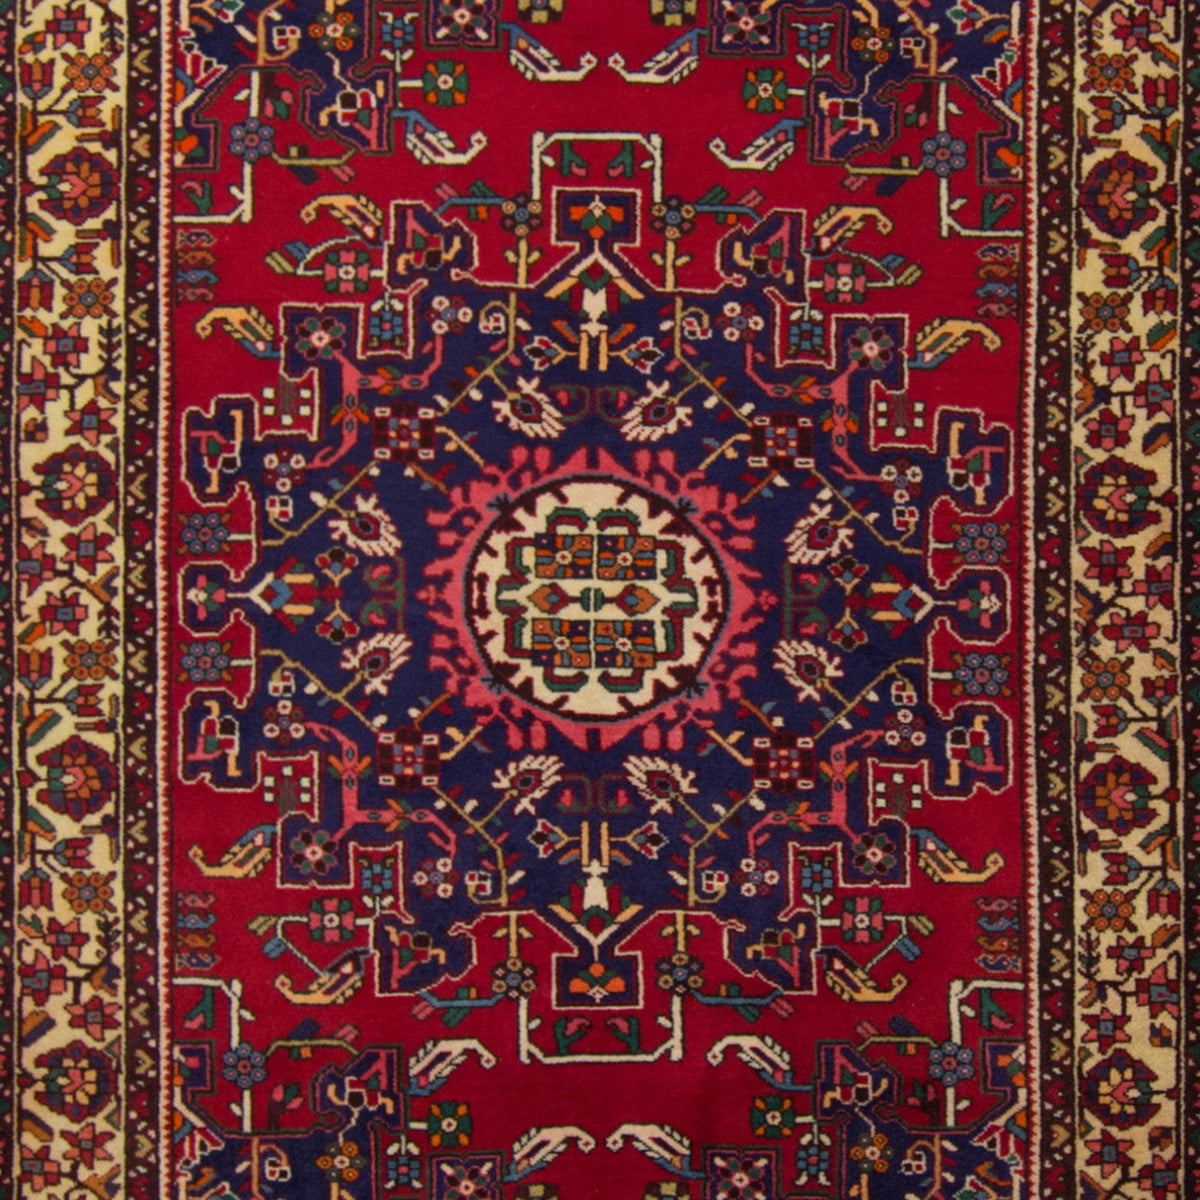 Authentic Hand-knotted Wool Persian Tafresh Rug 140cm x 204cm